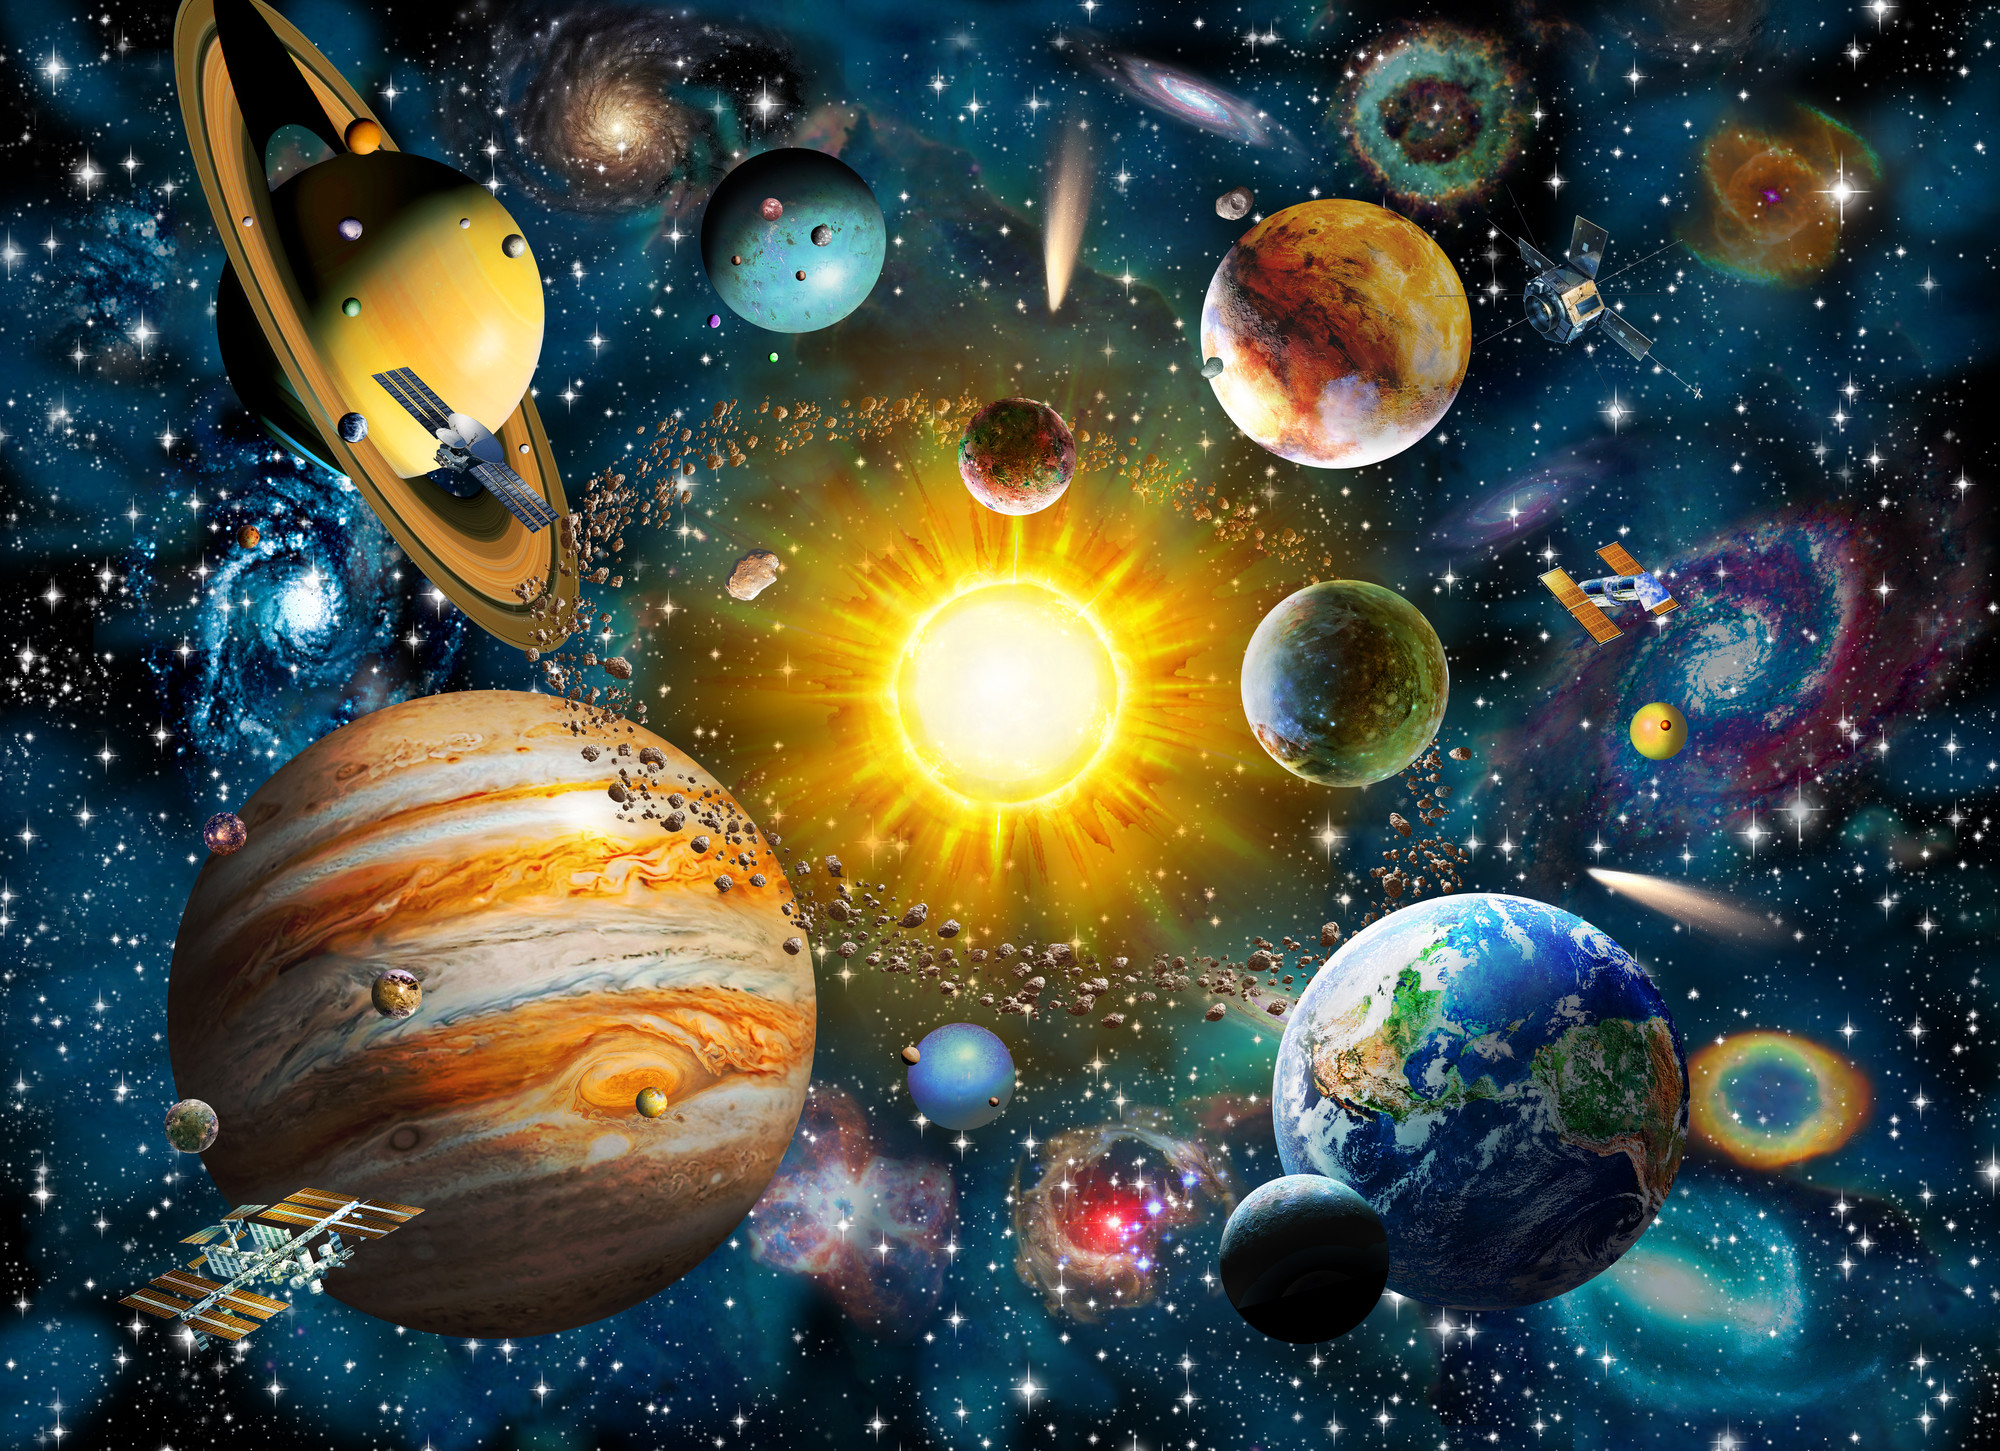 2000x1451 Our Solar System wallpaper mural